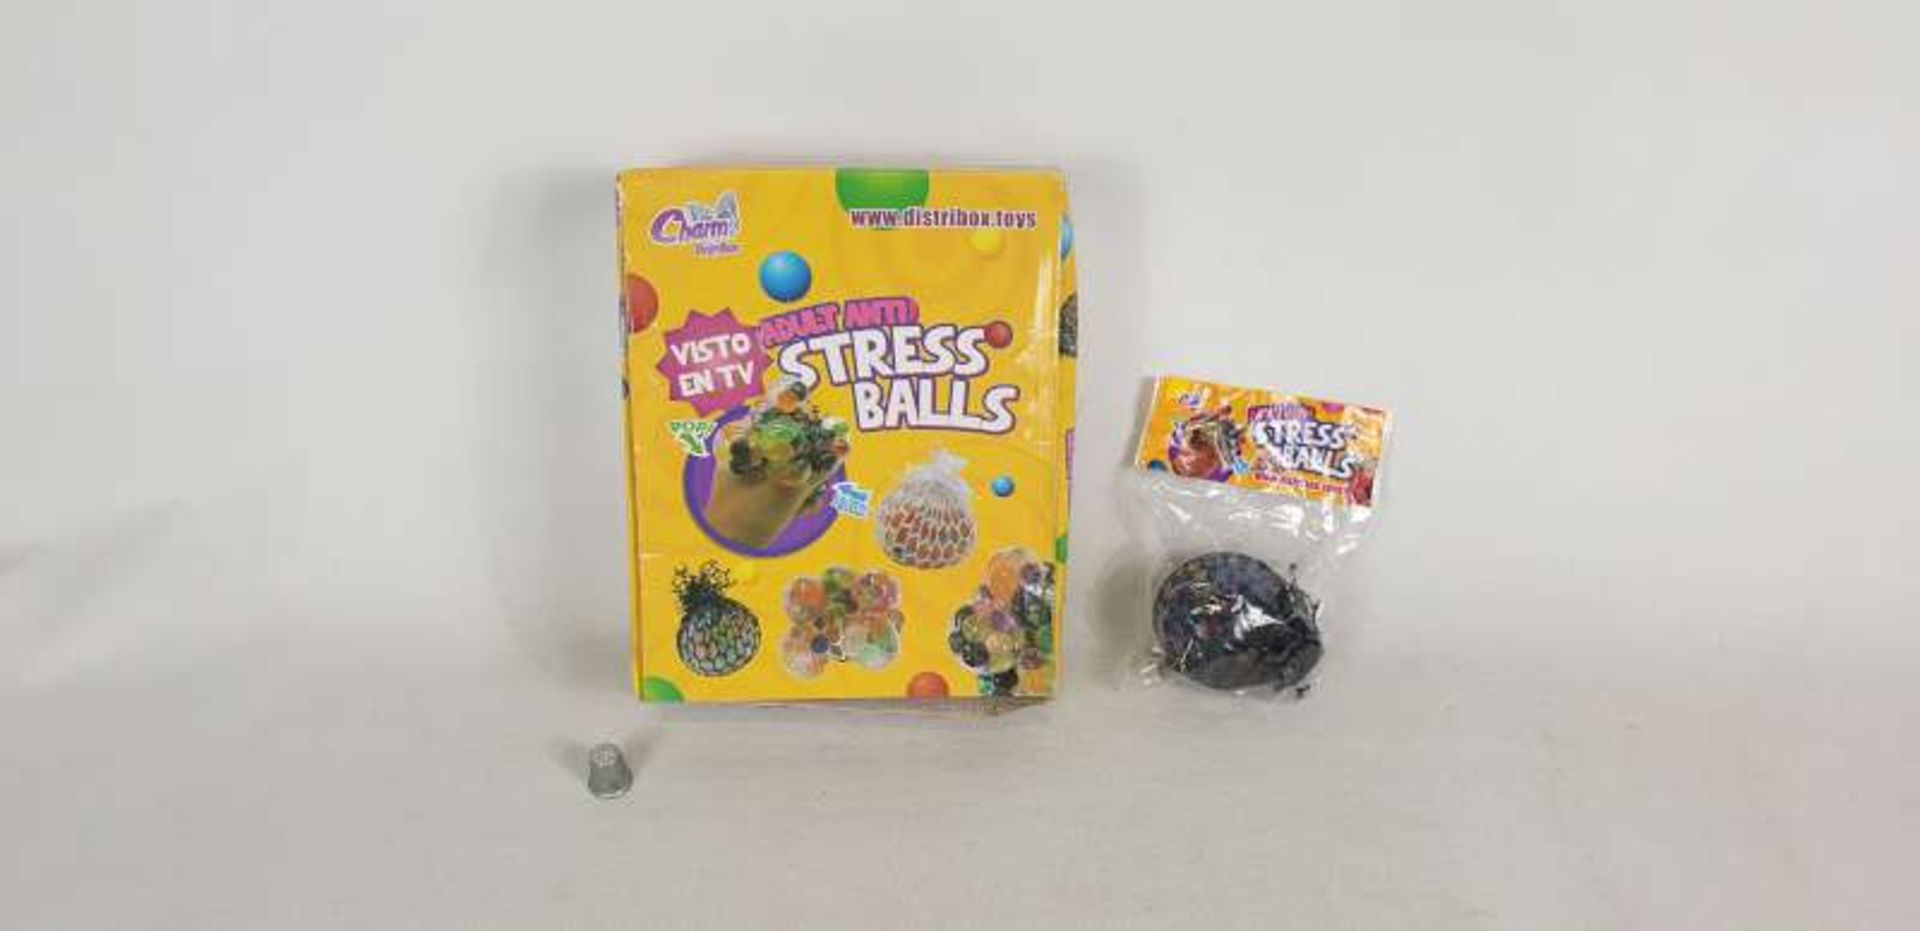 400 X ADULT ANTI STRESS BALLS IN 2 BOXES